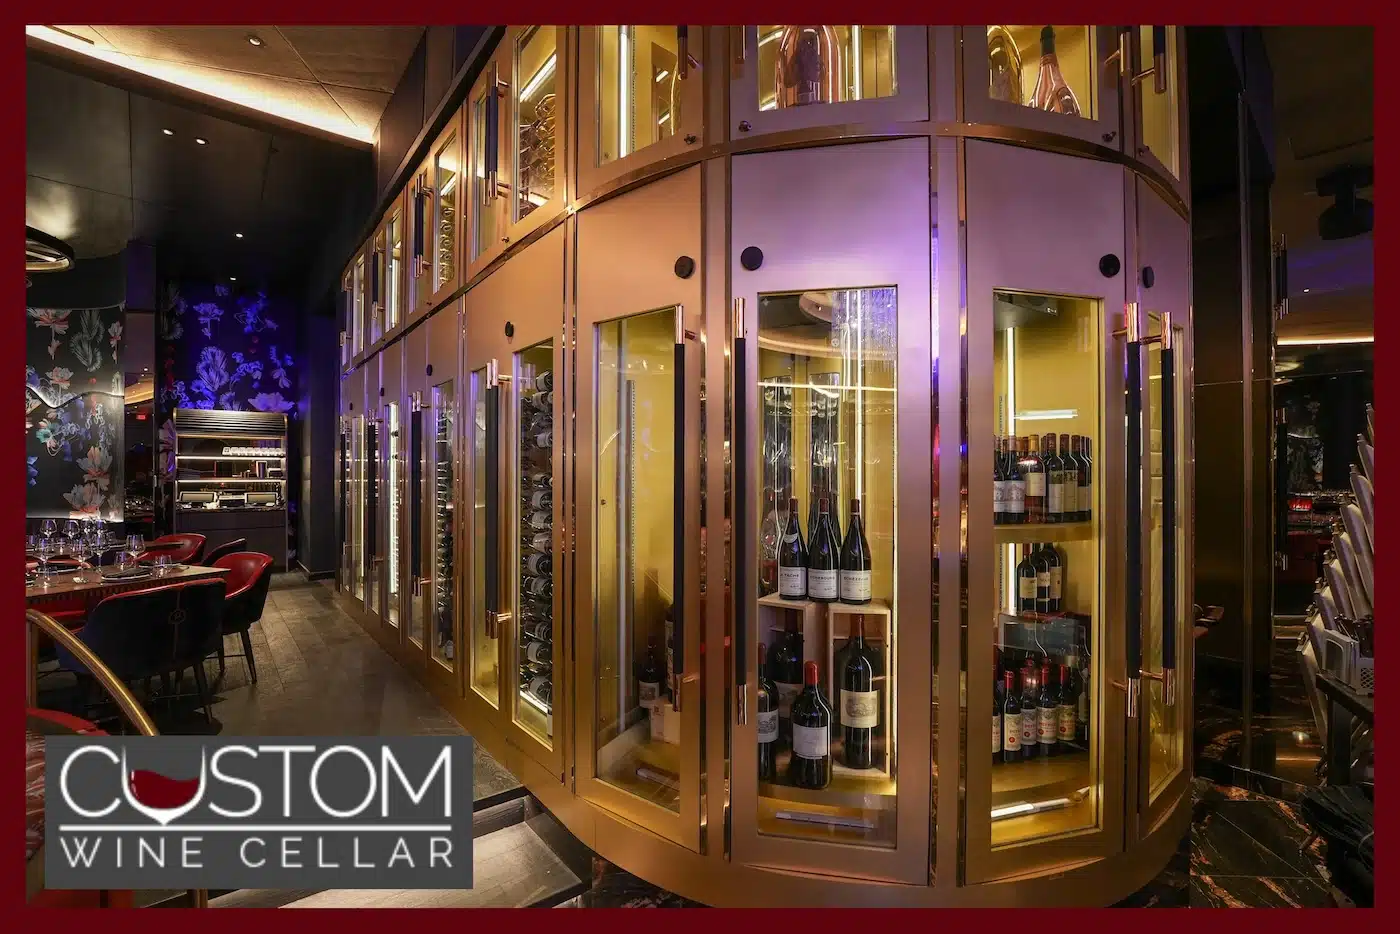 Full photo of a 20x15 ft luxury restaurant wine cellar design with dual-paned glass doors